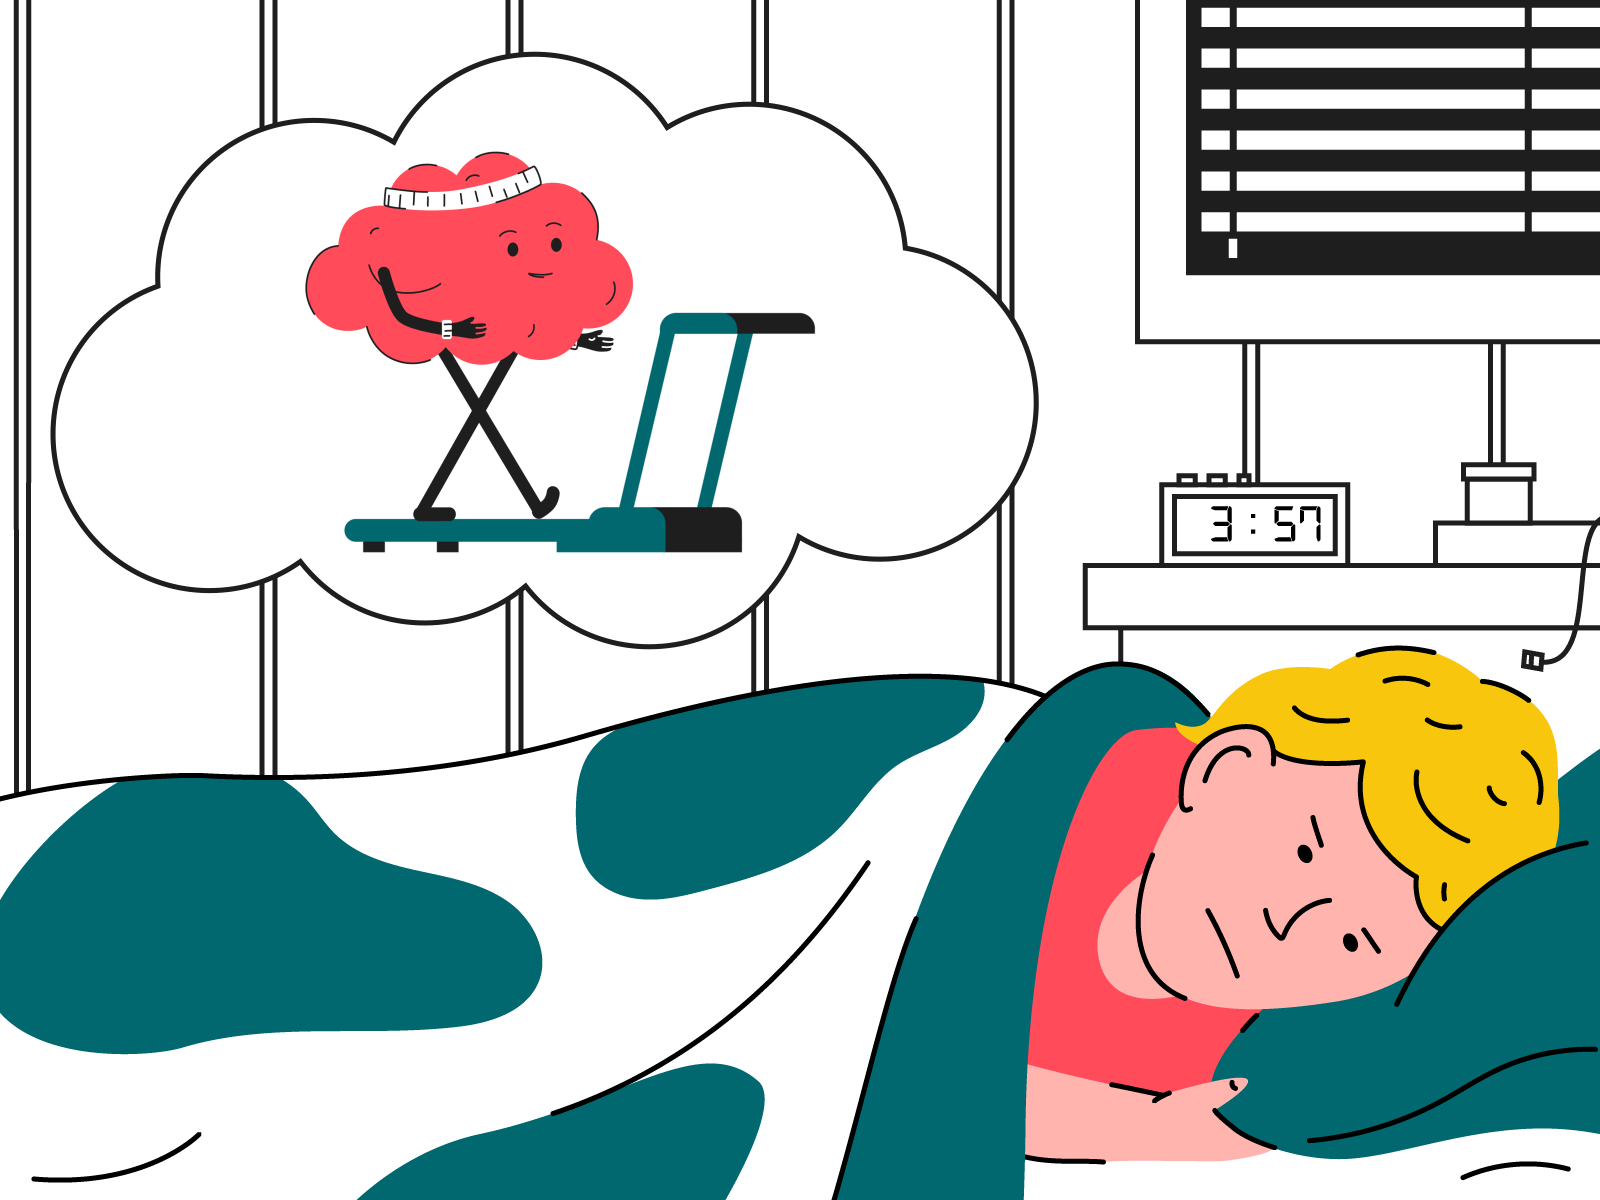 Trying to sleep 2d animation 2d art after effects animaiton design flat illustration funny illustration person sleep vector